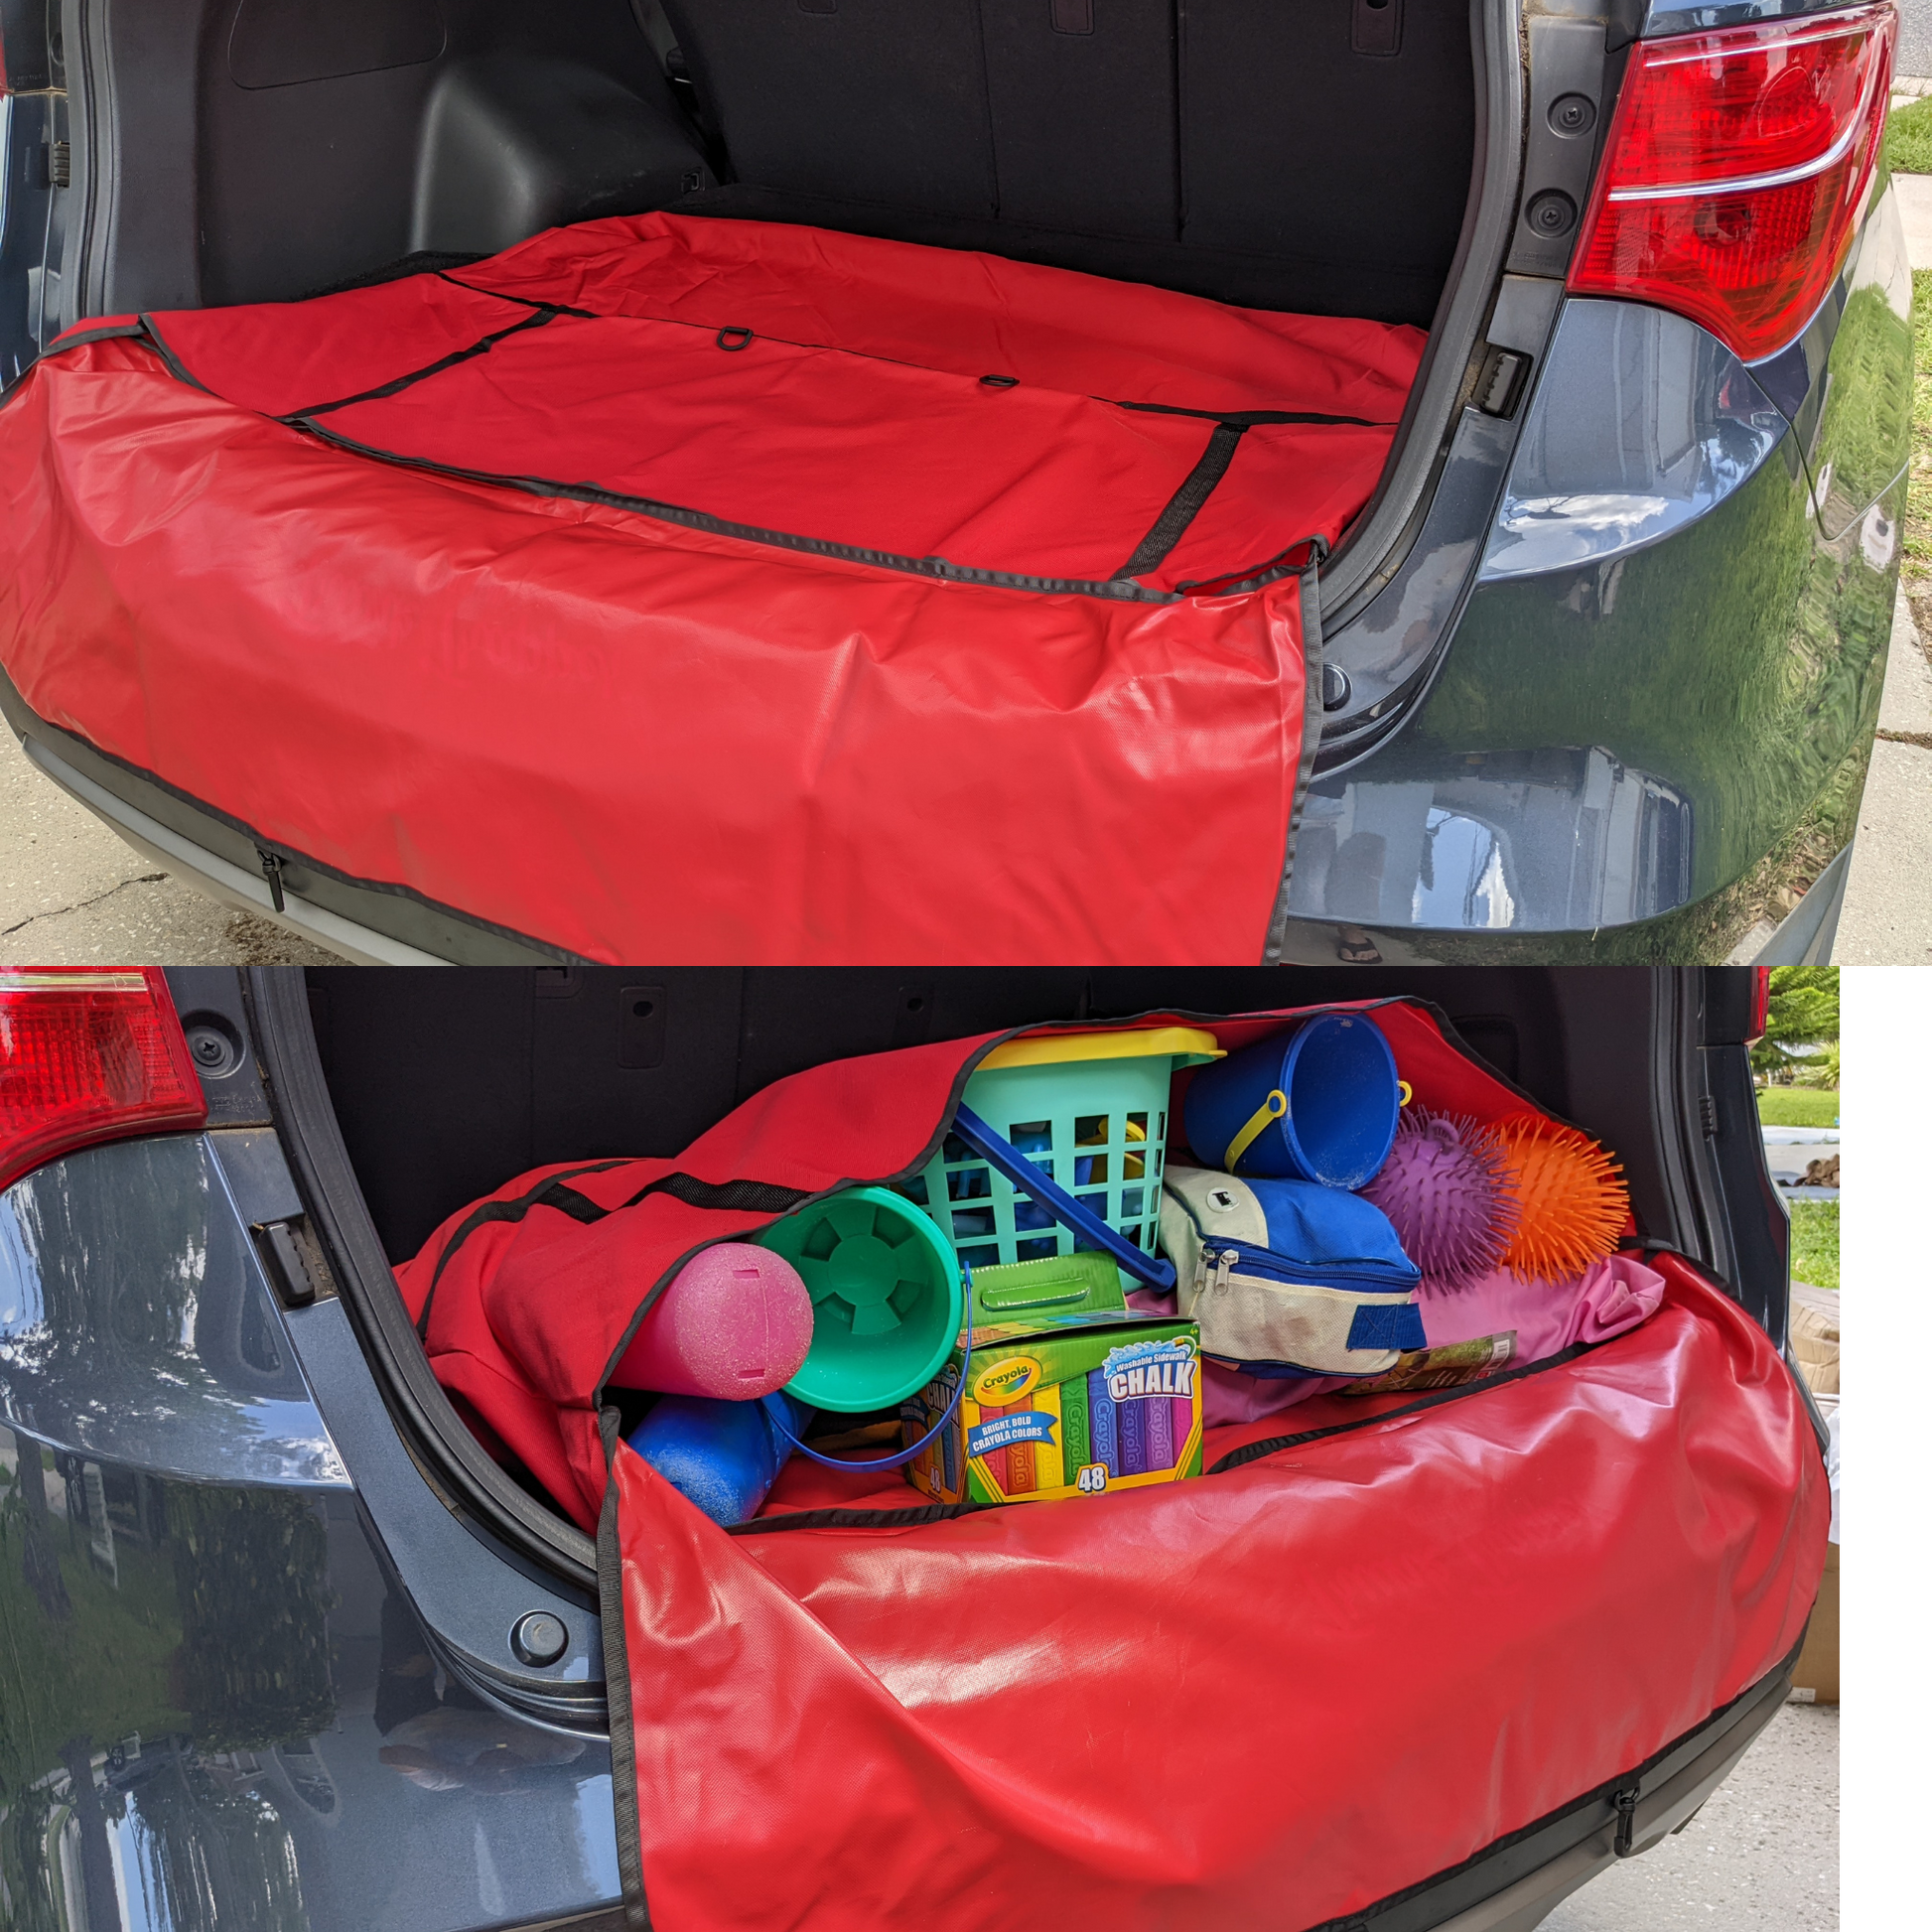 TrunkTrapper Efficient Red Beach Trapper: Top Trunk Storage Organizers, Boy's, Size: Large